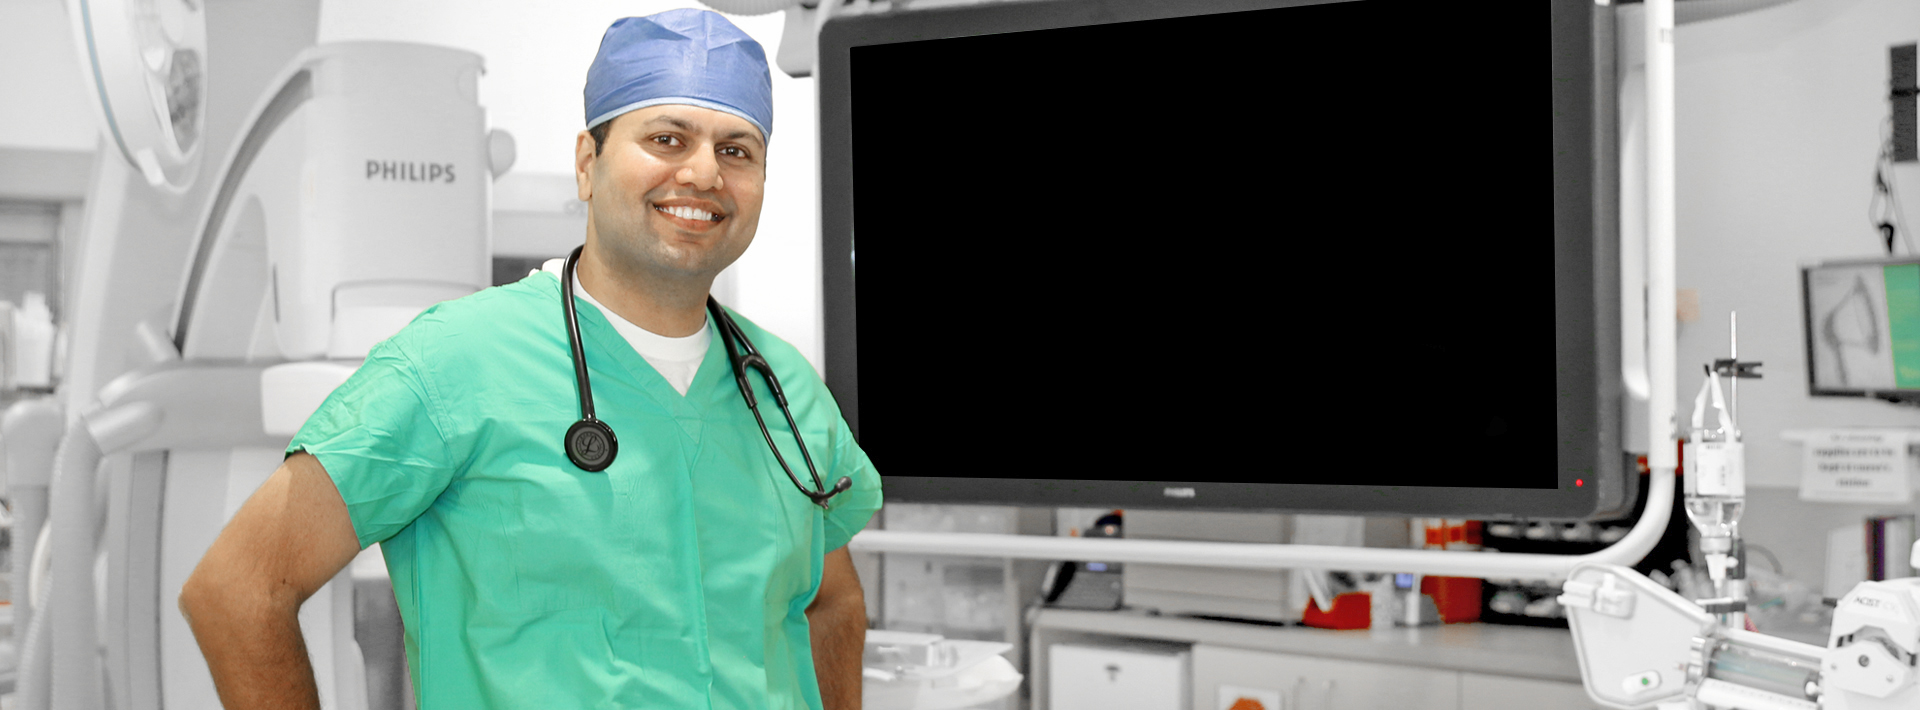 Vikas Soma, MD, FAAC standing in operating room